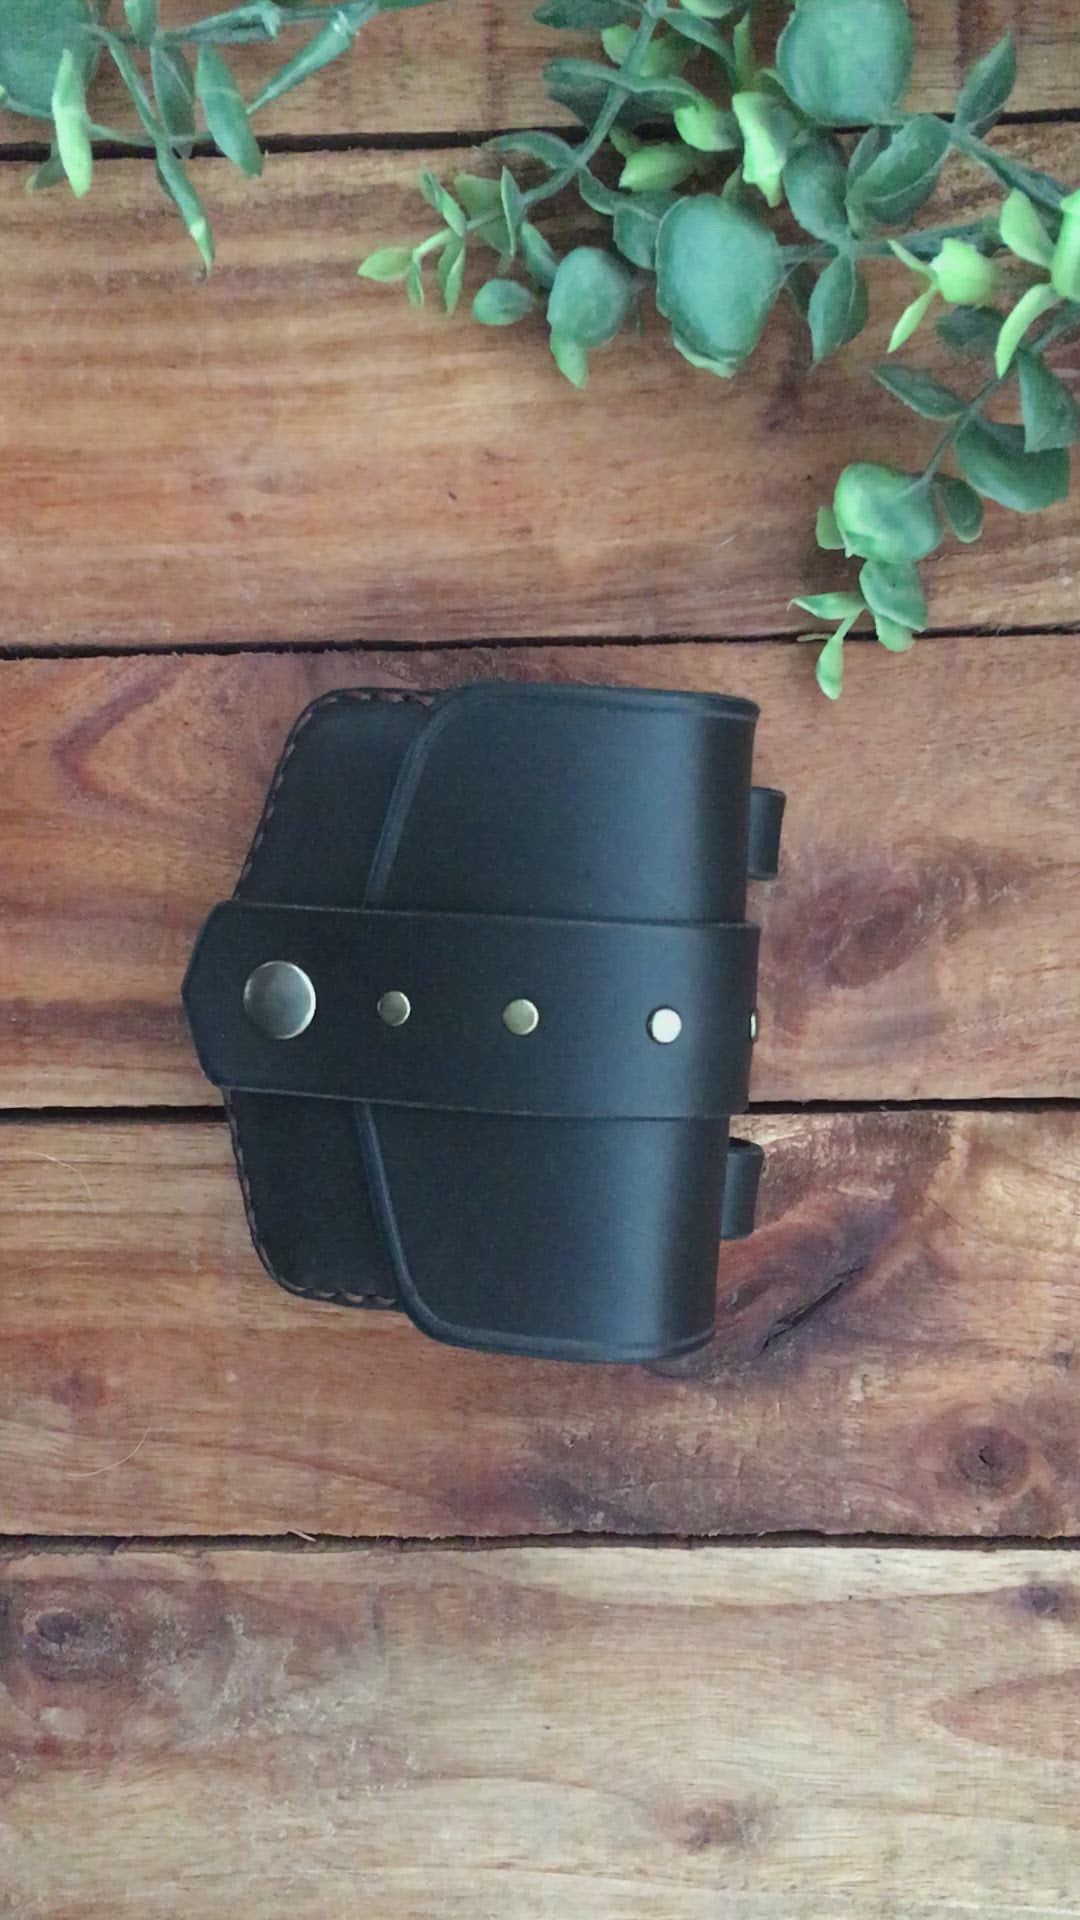 Video showing a Handmade Black Mini Leather Belt Pouch